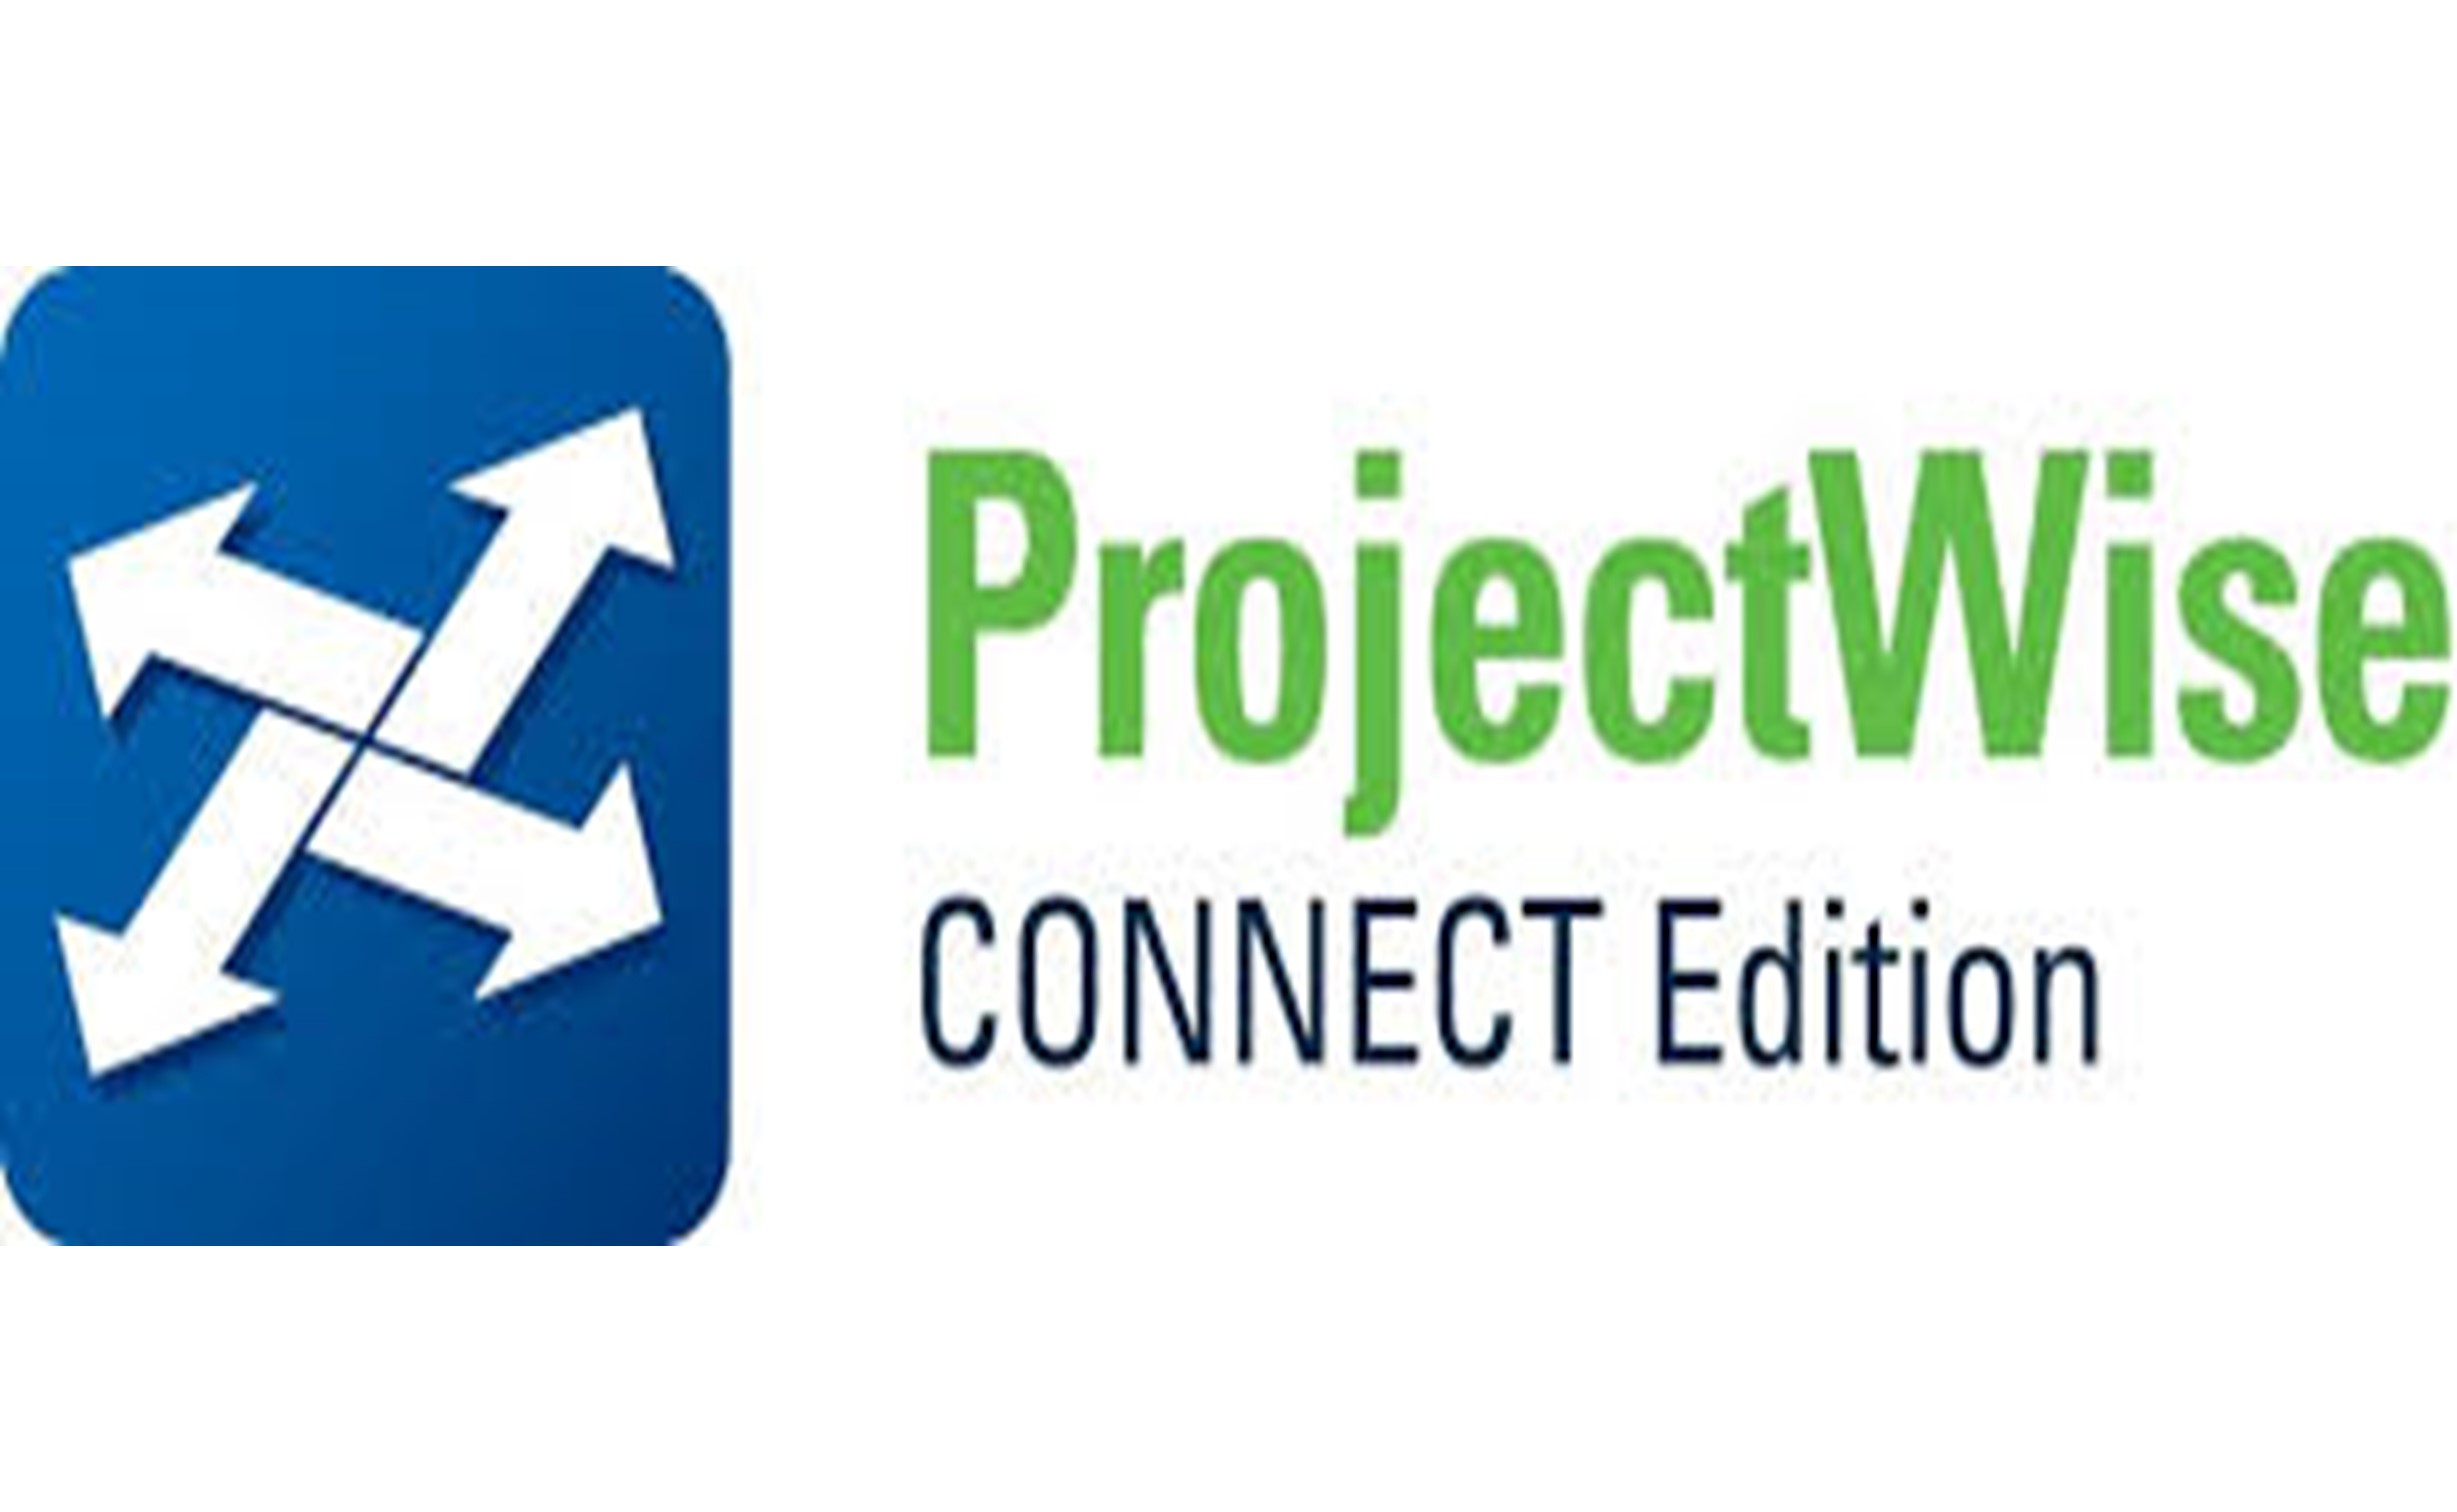 ProjectWise Connect Edition